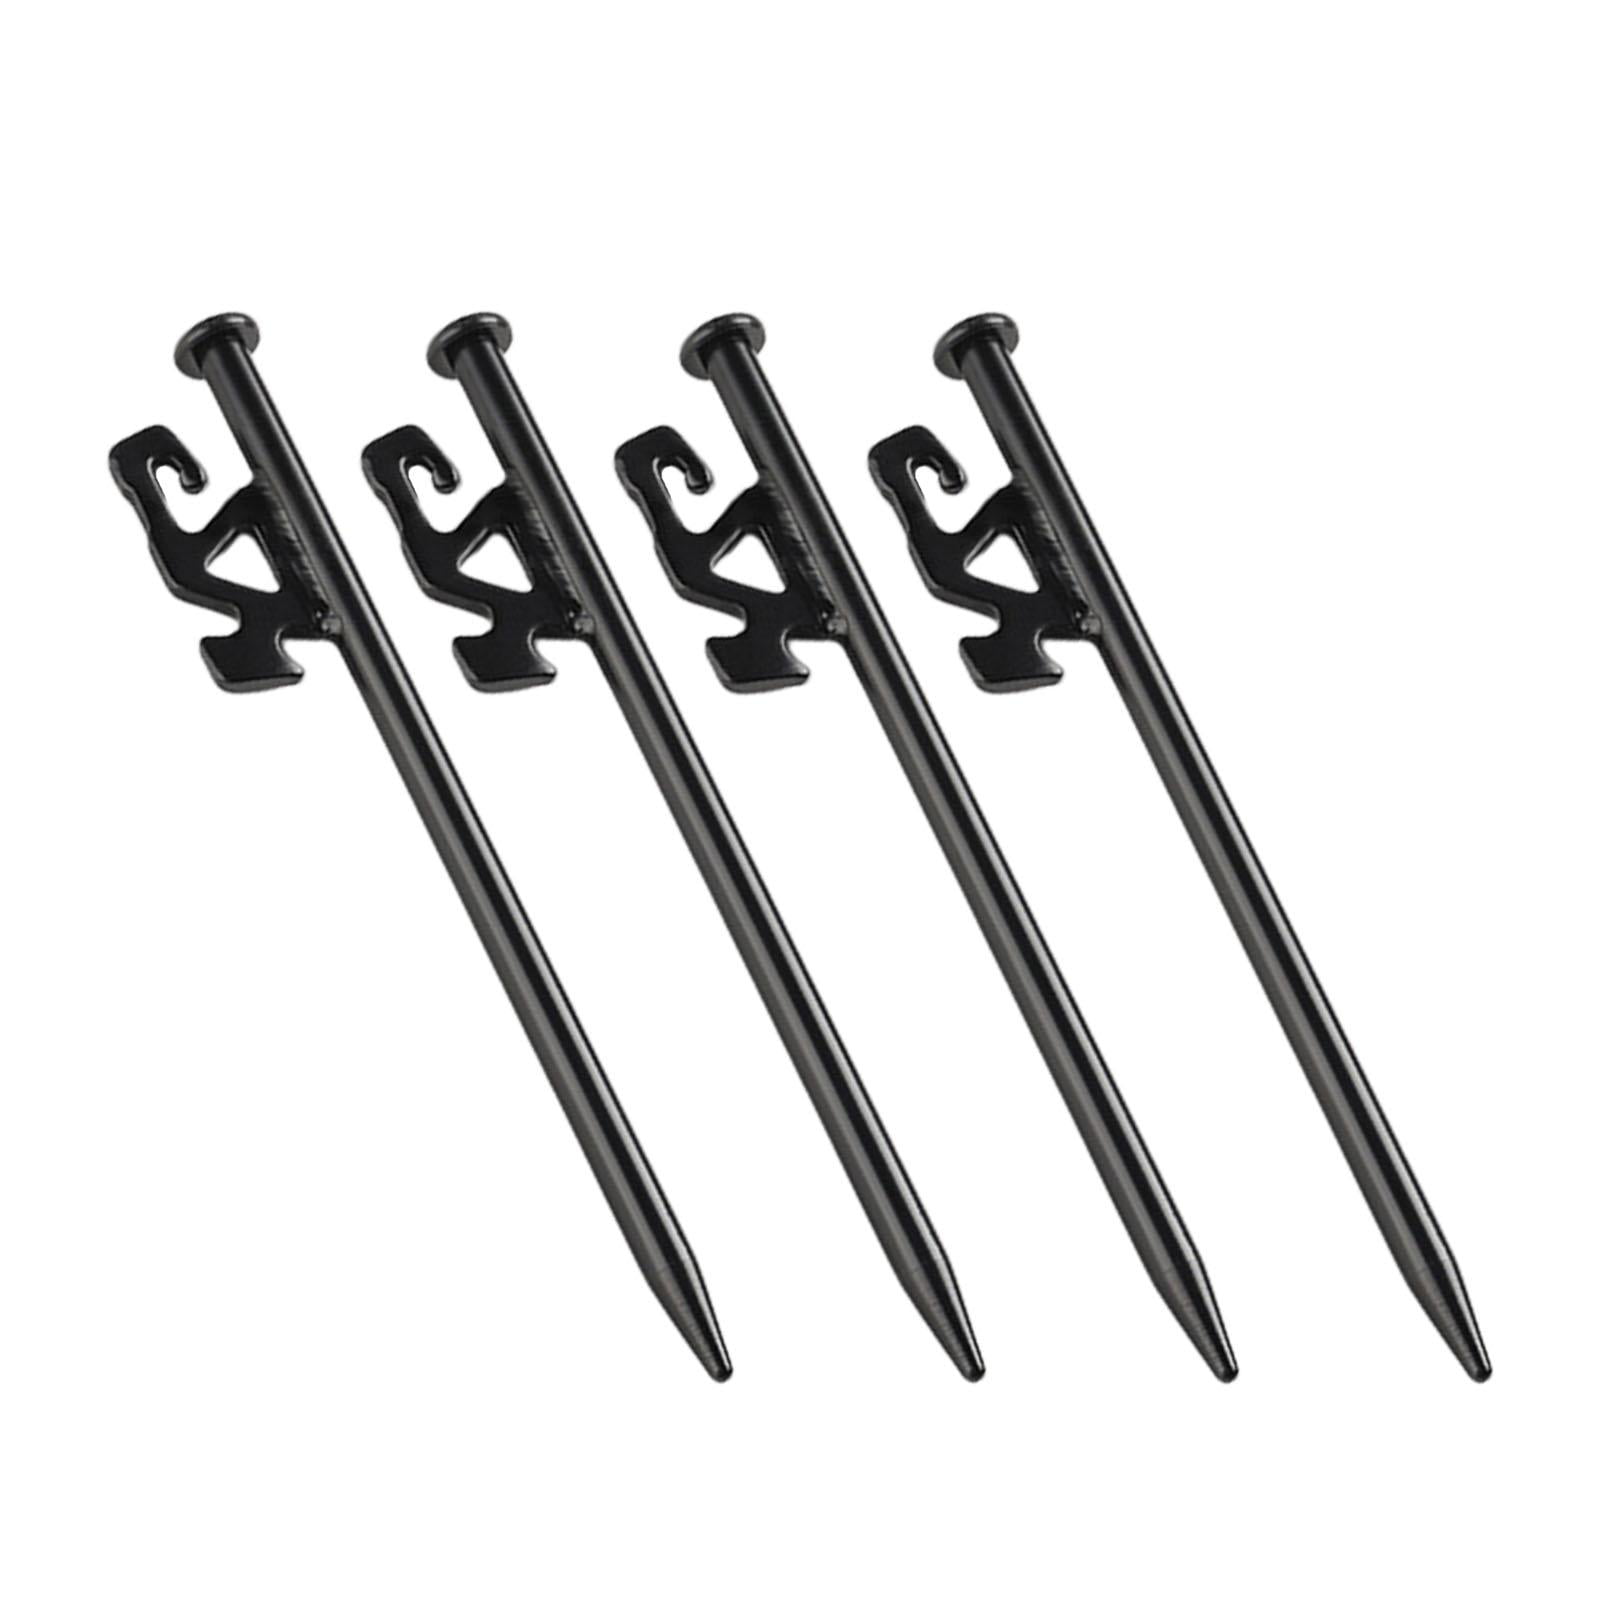 4pcs Heavy Duty Black Steel Metal Tent Pegs Camping Stakes Pegs Ground Nail 